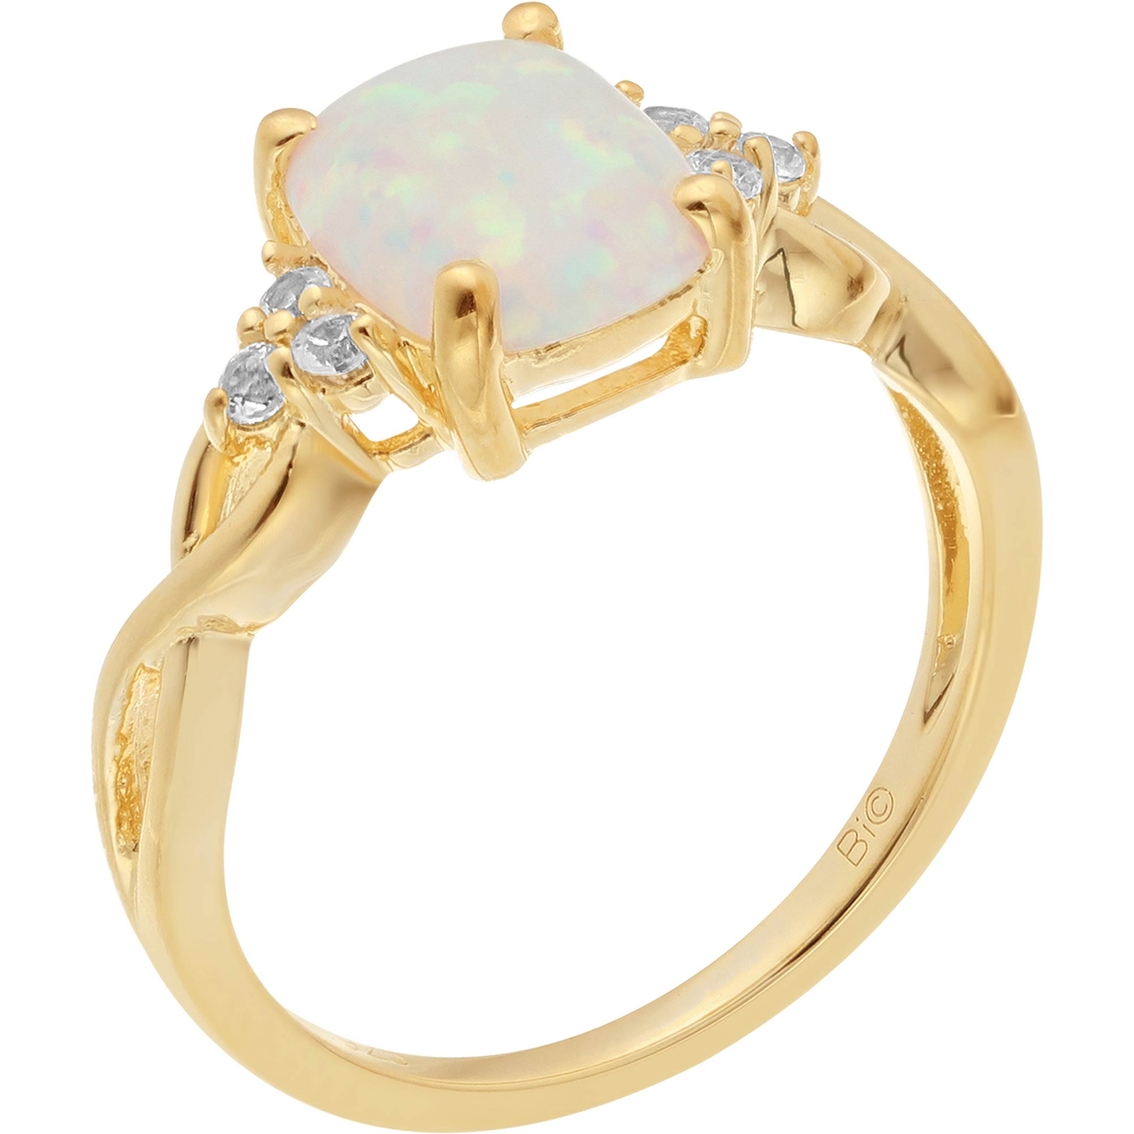 10K Yellow Gold Created Opal and White topaz Ring - Image 3 of 3